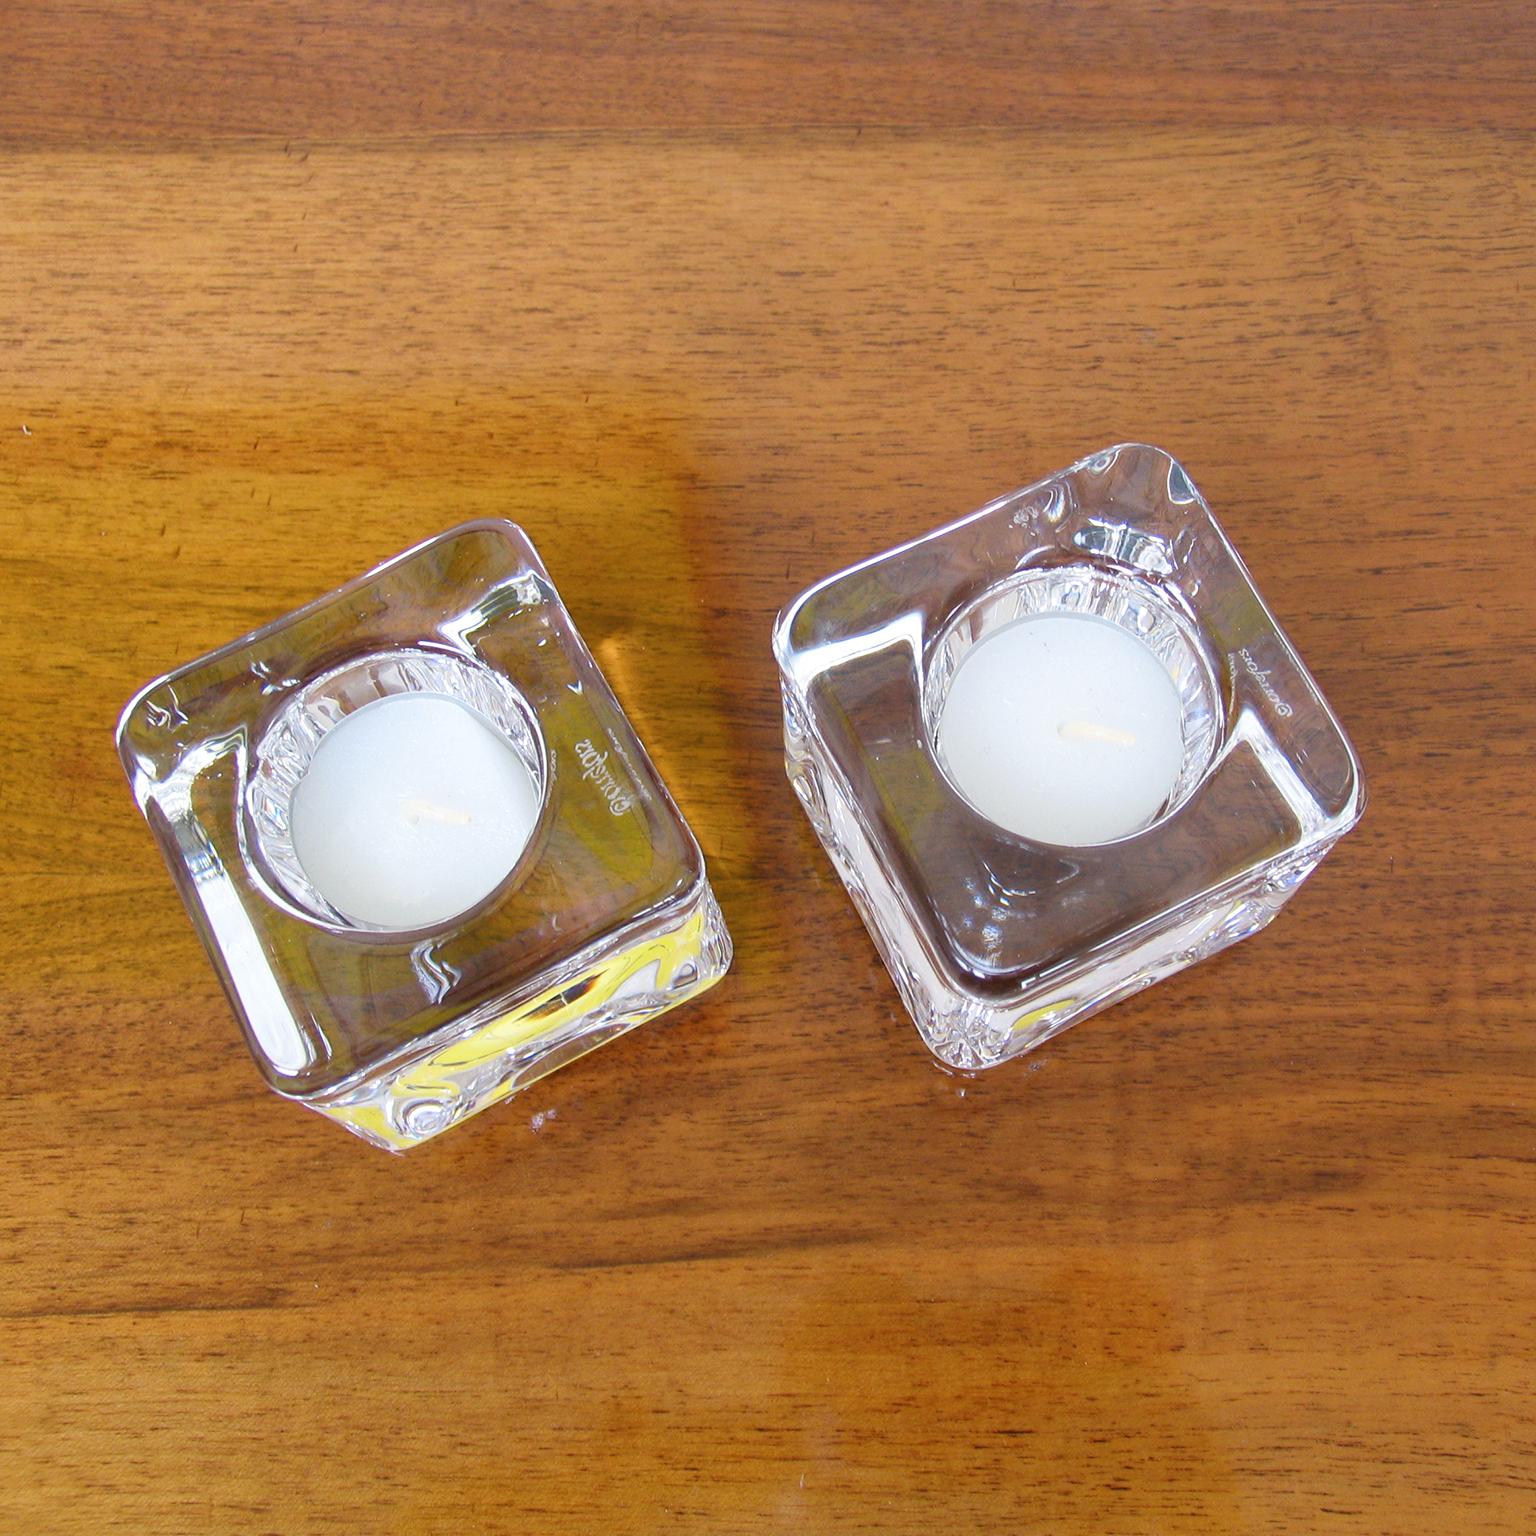 Swedish Crystal Votive Candle Holders by Goran Wärff for Orrefors, Mid-Century Modern For Sale